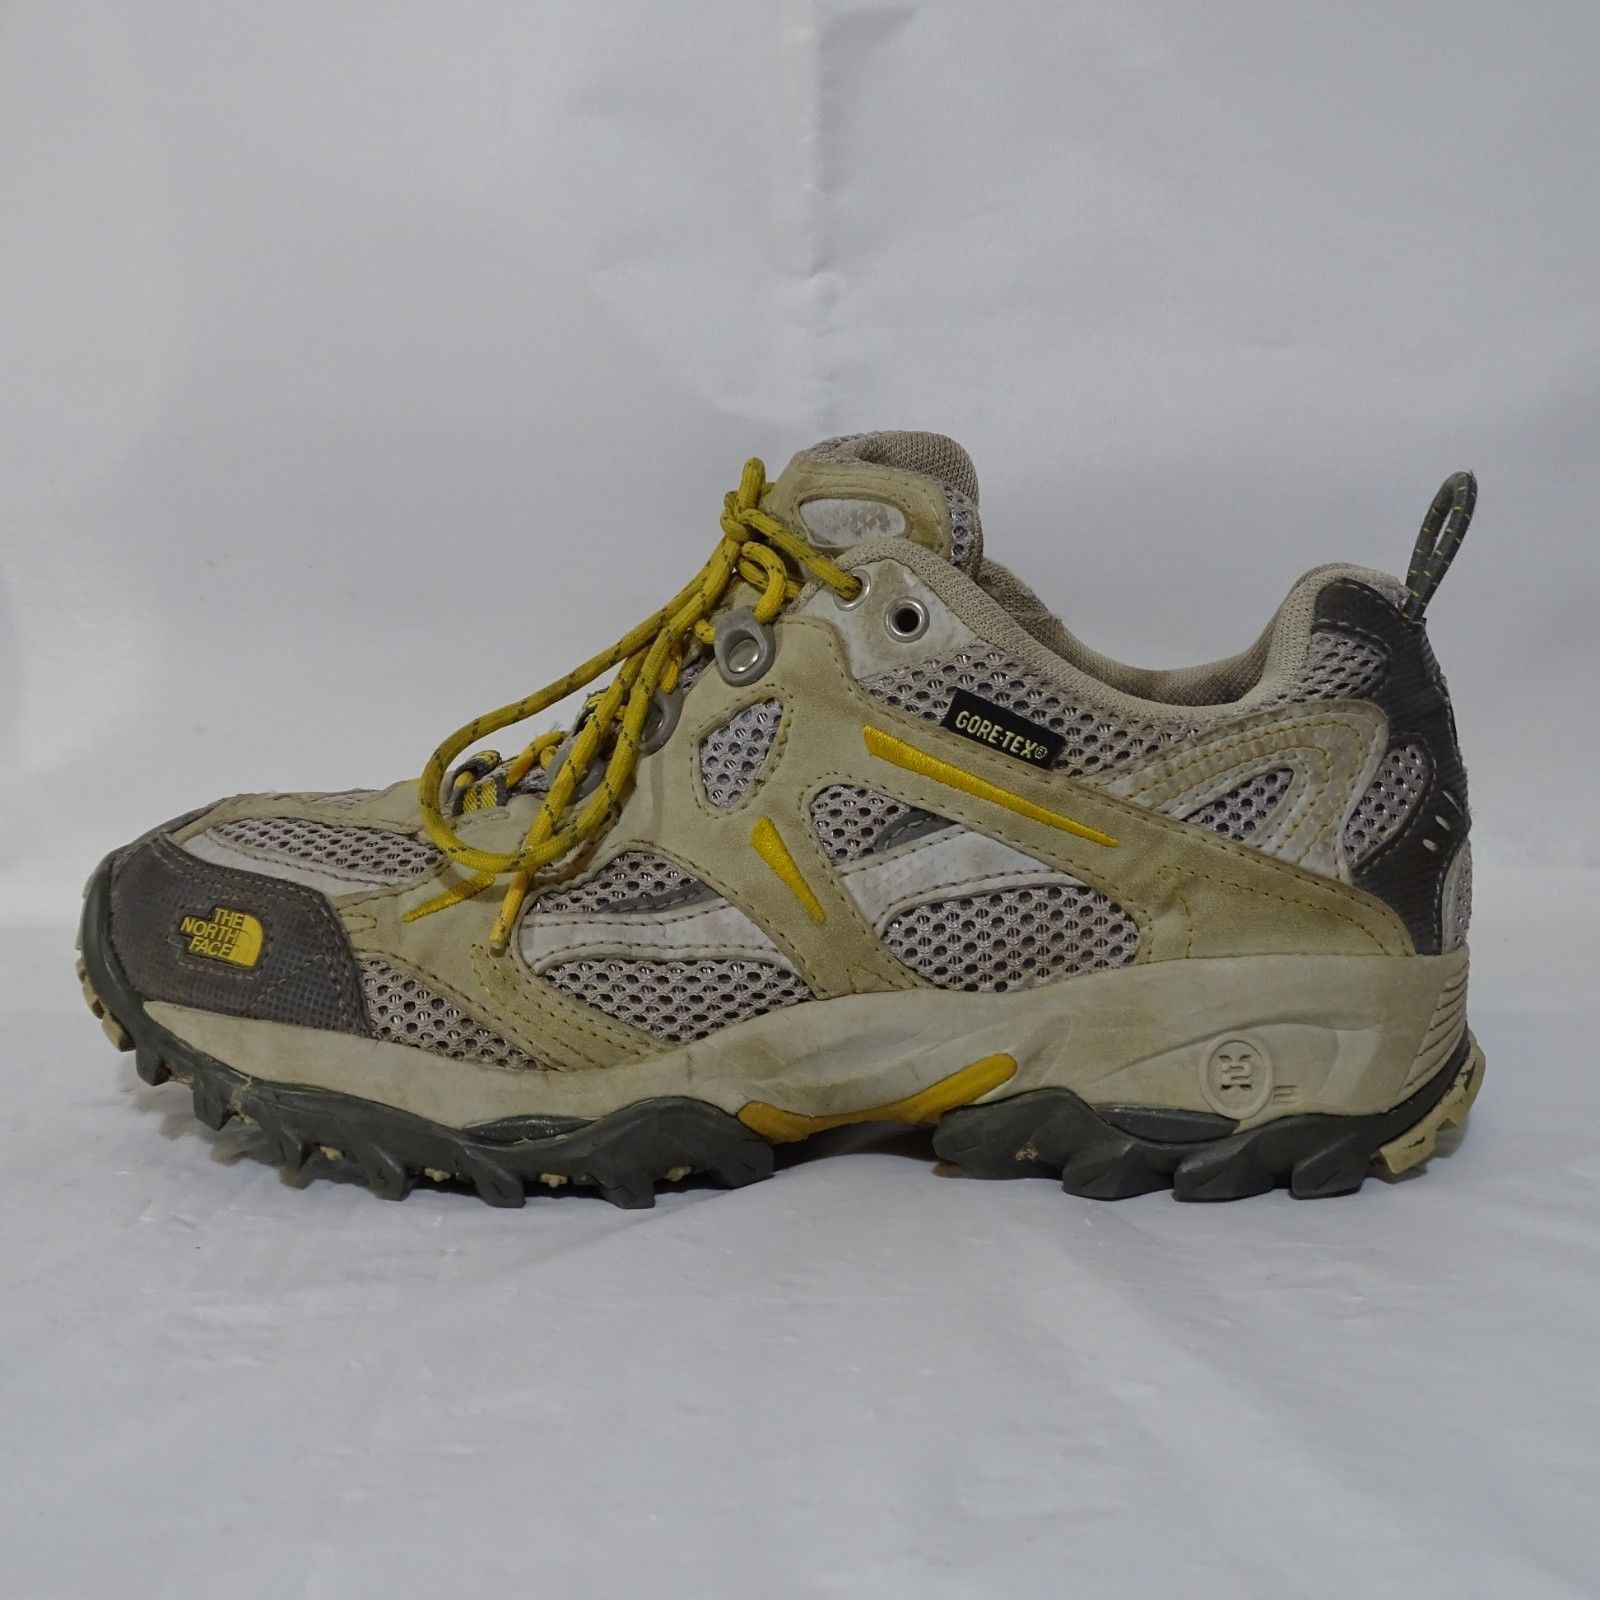 The North Face Hiking Shoes Vibram Sole Women Size 7.5 Tan Gray Mesh ...